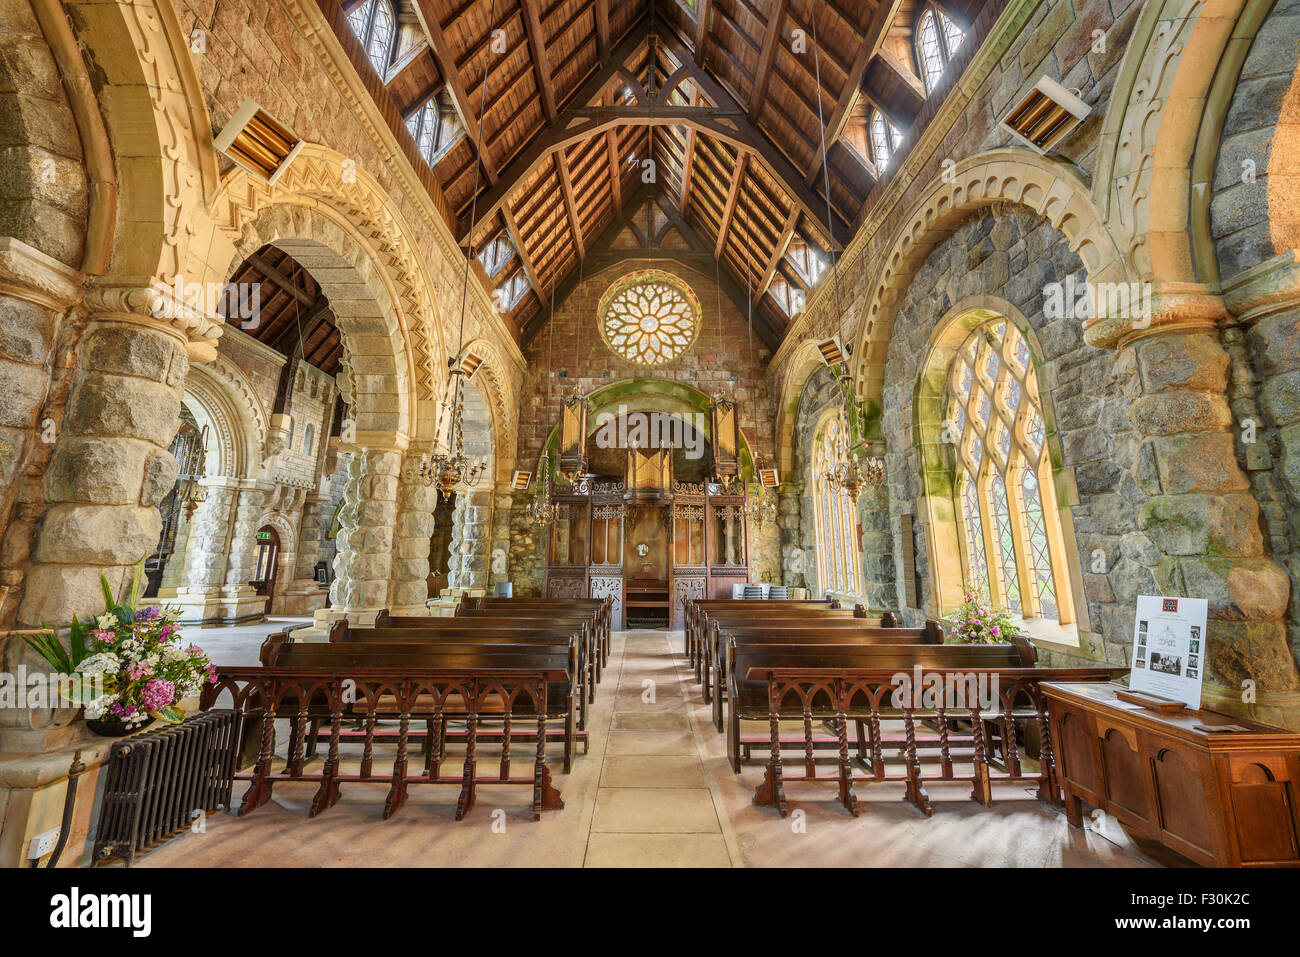 Interior of St Conan’s Kirk located in Loch Awe, Argyll and Bute, Scotland. Stock Photo